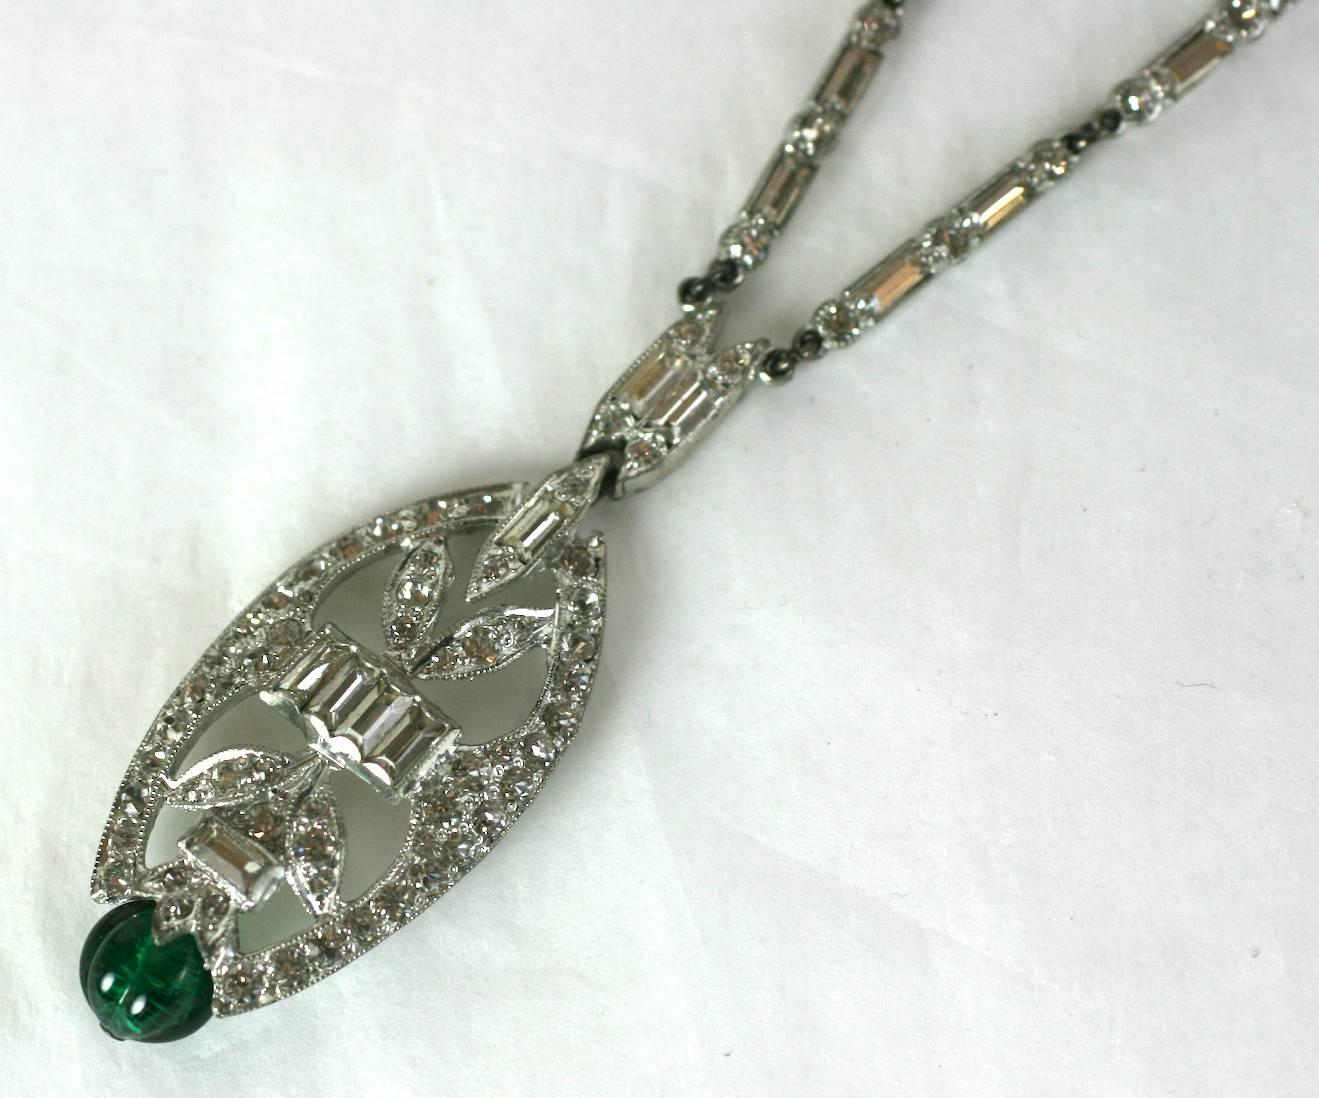 Faux Emerald Bead Deco Pendant from the 1920's. Pave rhinestones and baguettes are set into white metal with a fluted faux emerald bead at base of pendant. 1920's USA.
Excellent condition. 
Length 16